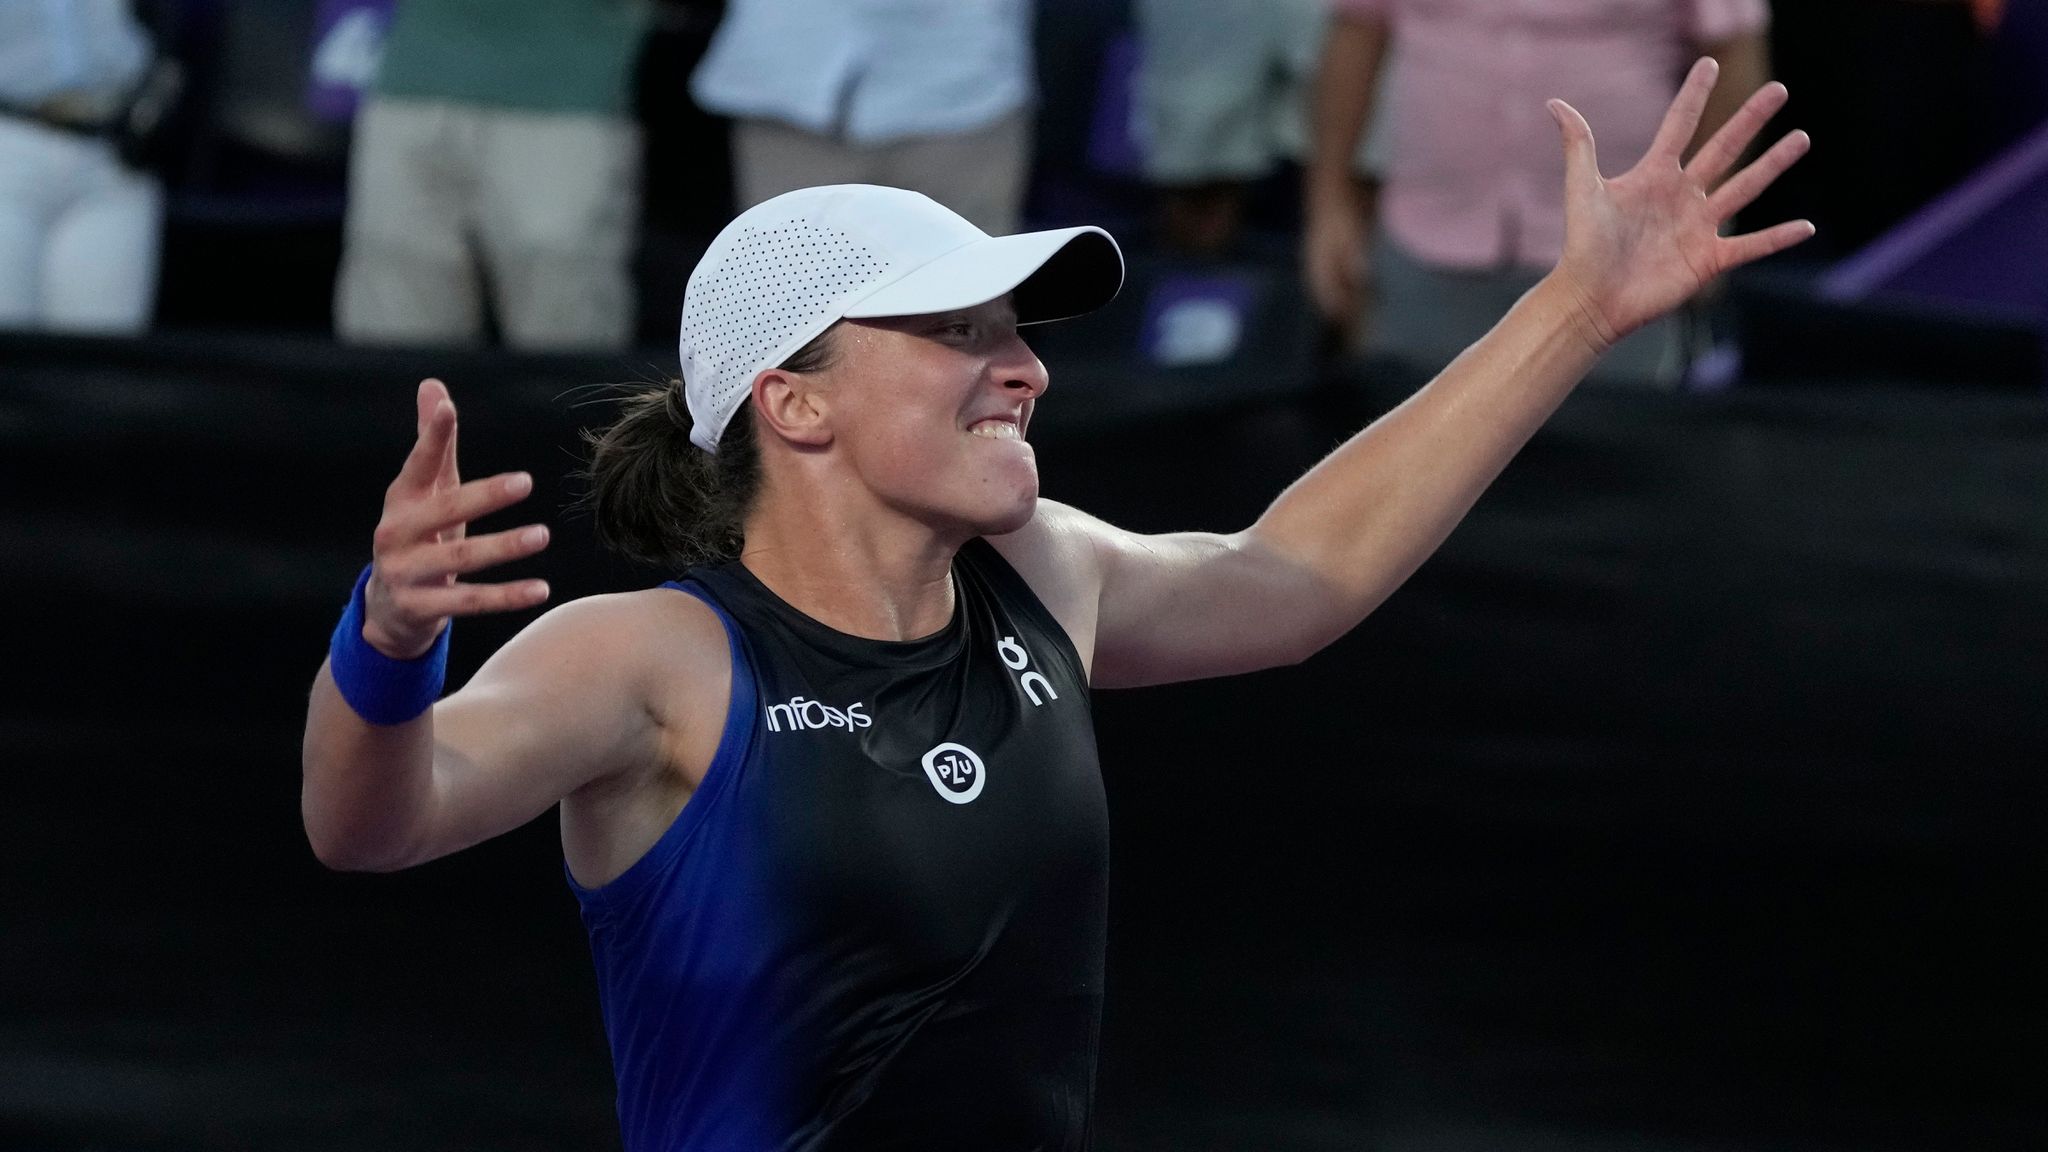 WTA Finals Iga Swiatek storms to glory with straight-sets win over Jessica Pegula in Cancun Tennis News Sky Sports